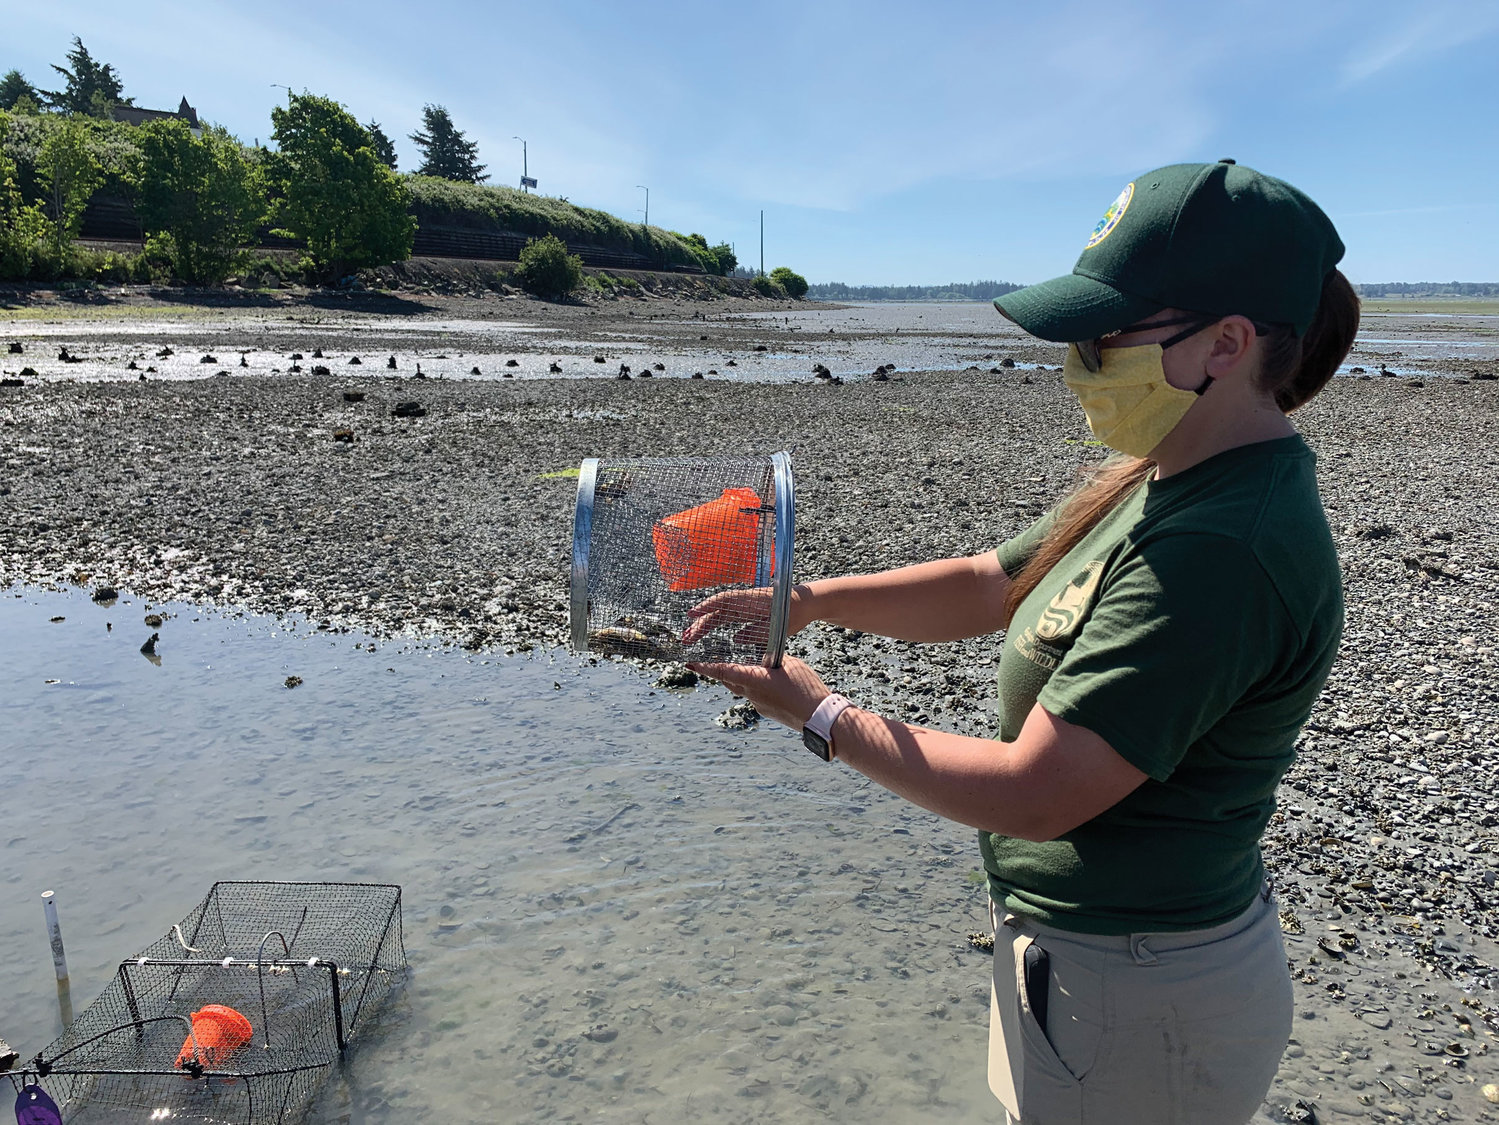 Lindsey Parker, a Washington Department of Fish and Wildlife technician, trapping for European green crabs in Drayton Harbor this summer.